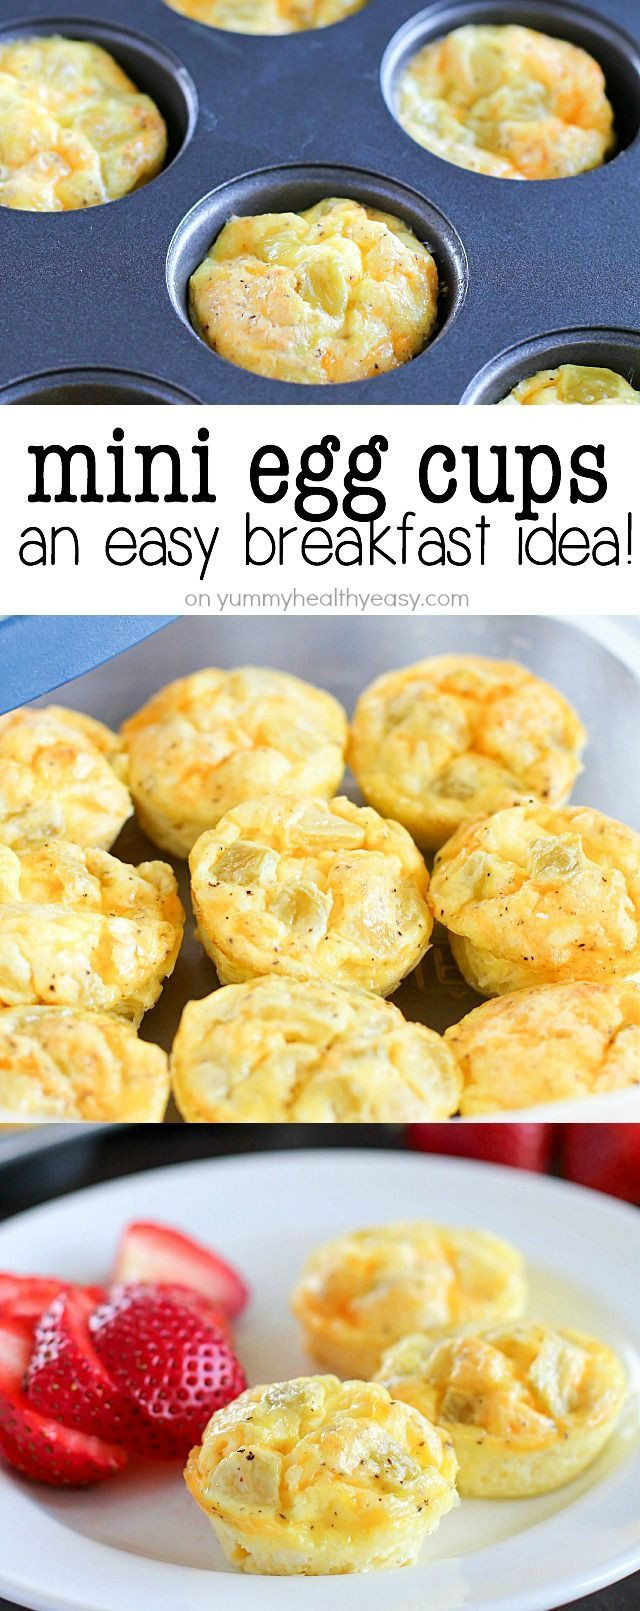 Healthy Make Ahead Breakfast Recipes
 Extremely simple and delicious healthy mini egg cups A